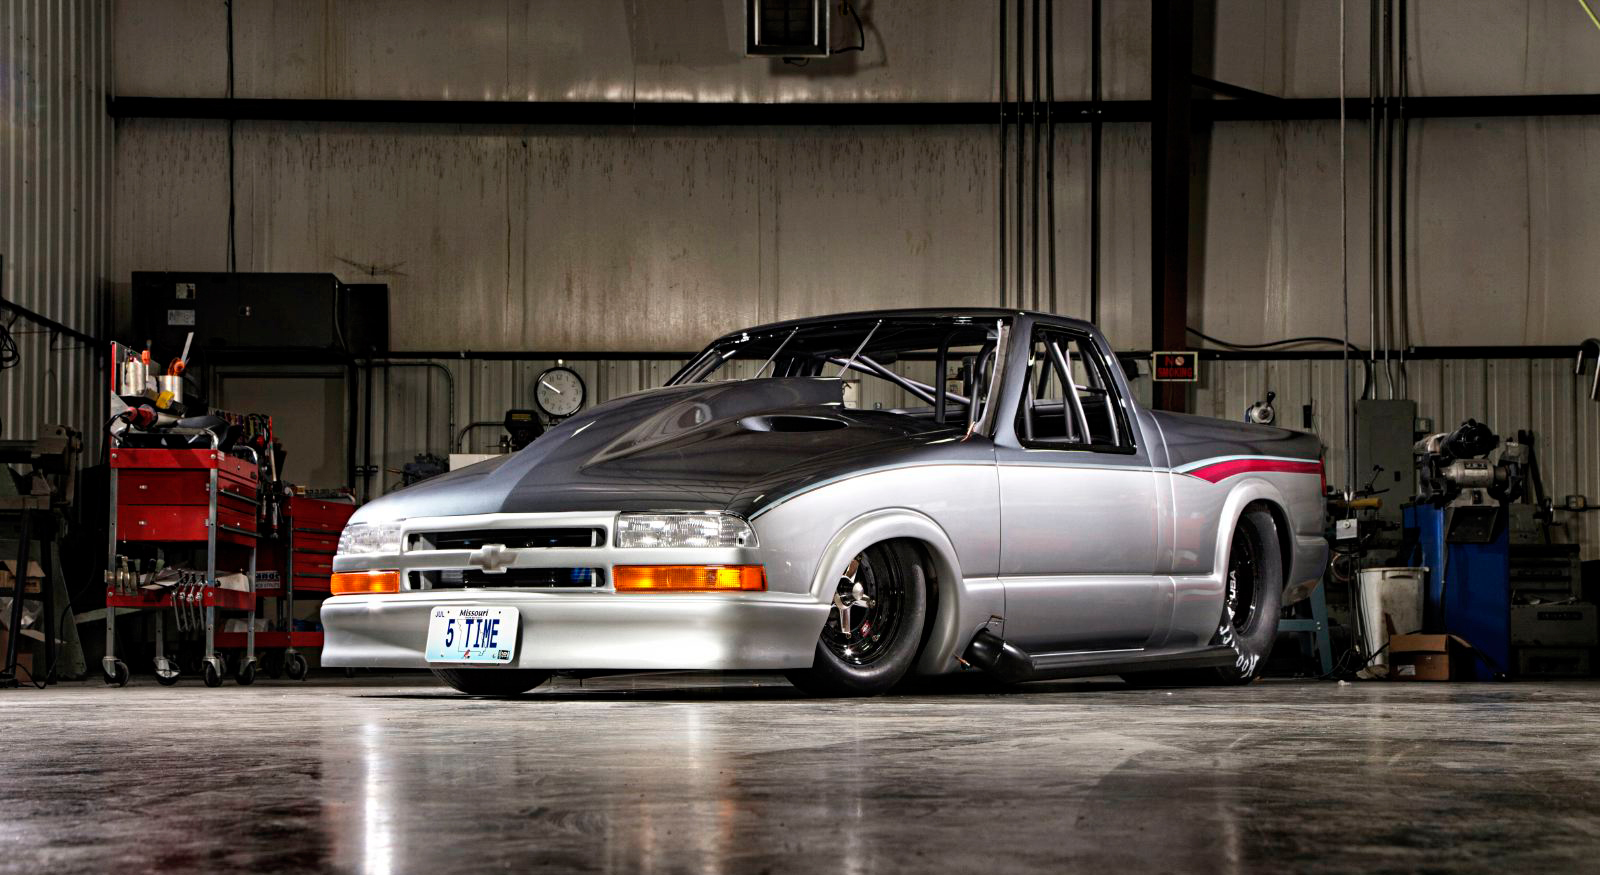 World's Quickest Street Legal car is a Chevy S10 pickup truck.